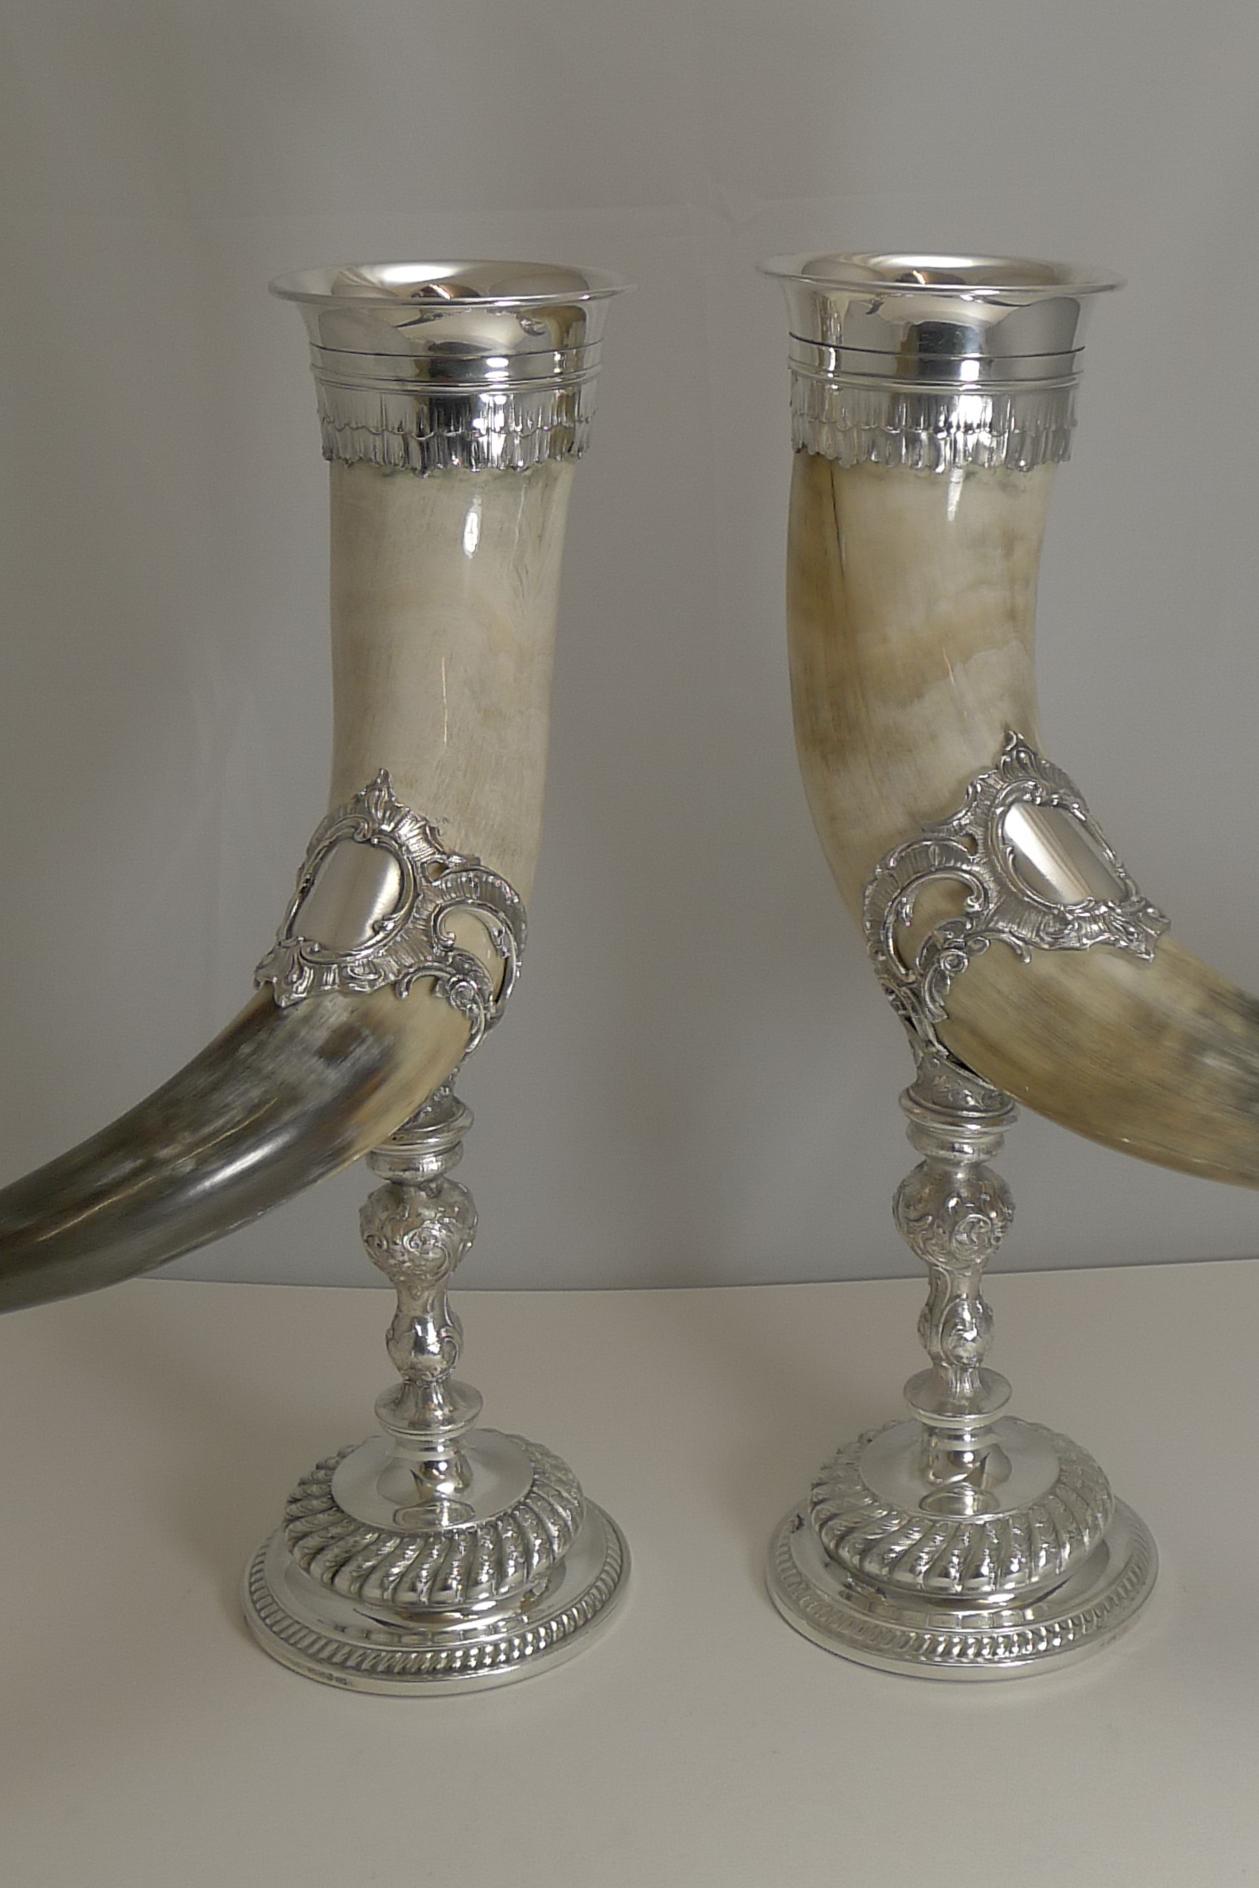 A rare pair of oversized Cornucopia, larger than most and a real show stopper. Probably German in origin, they are marked on the base with a star or daisy mark which I am not familiar with and also E P for Electro-Plated.

Dating to circa 1900,